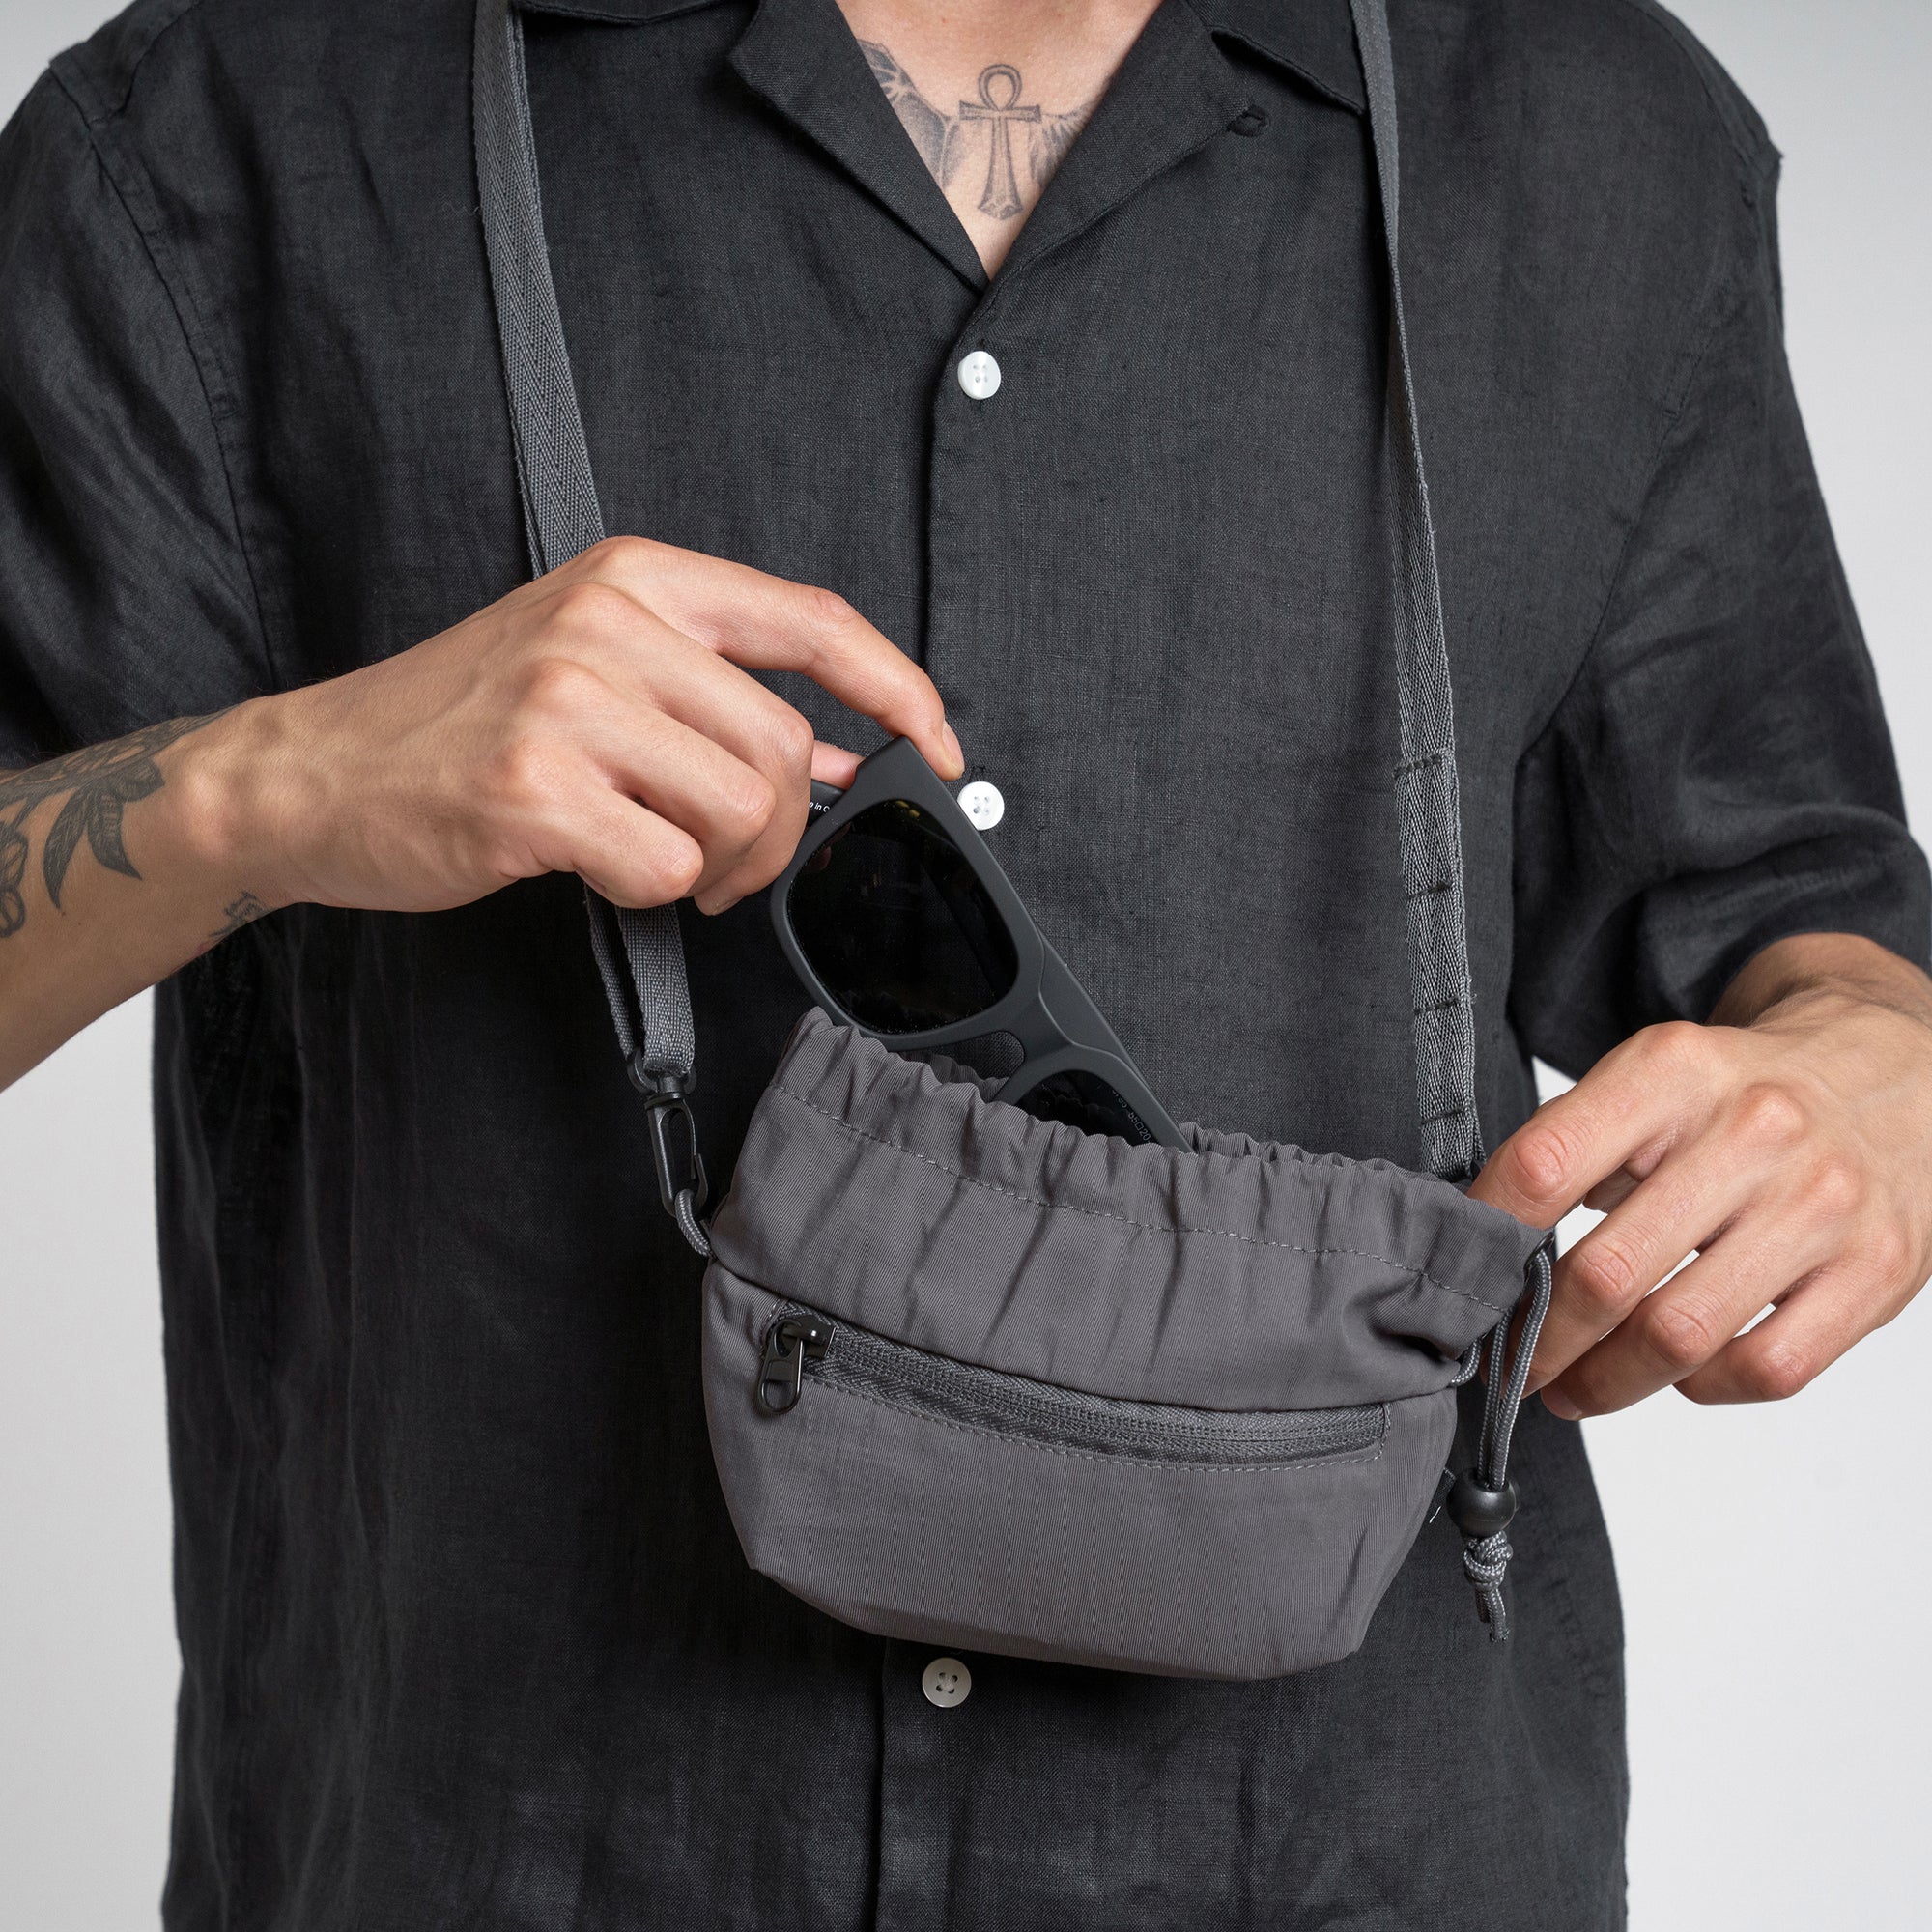 TPS (Tray-Pouch-Sling)